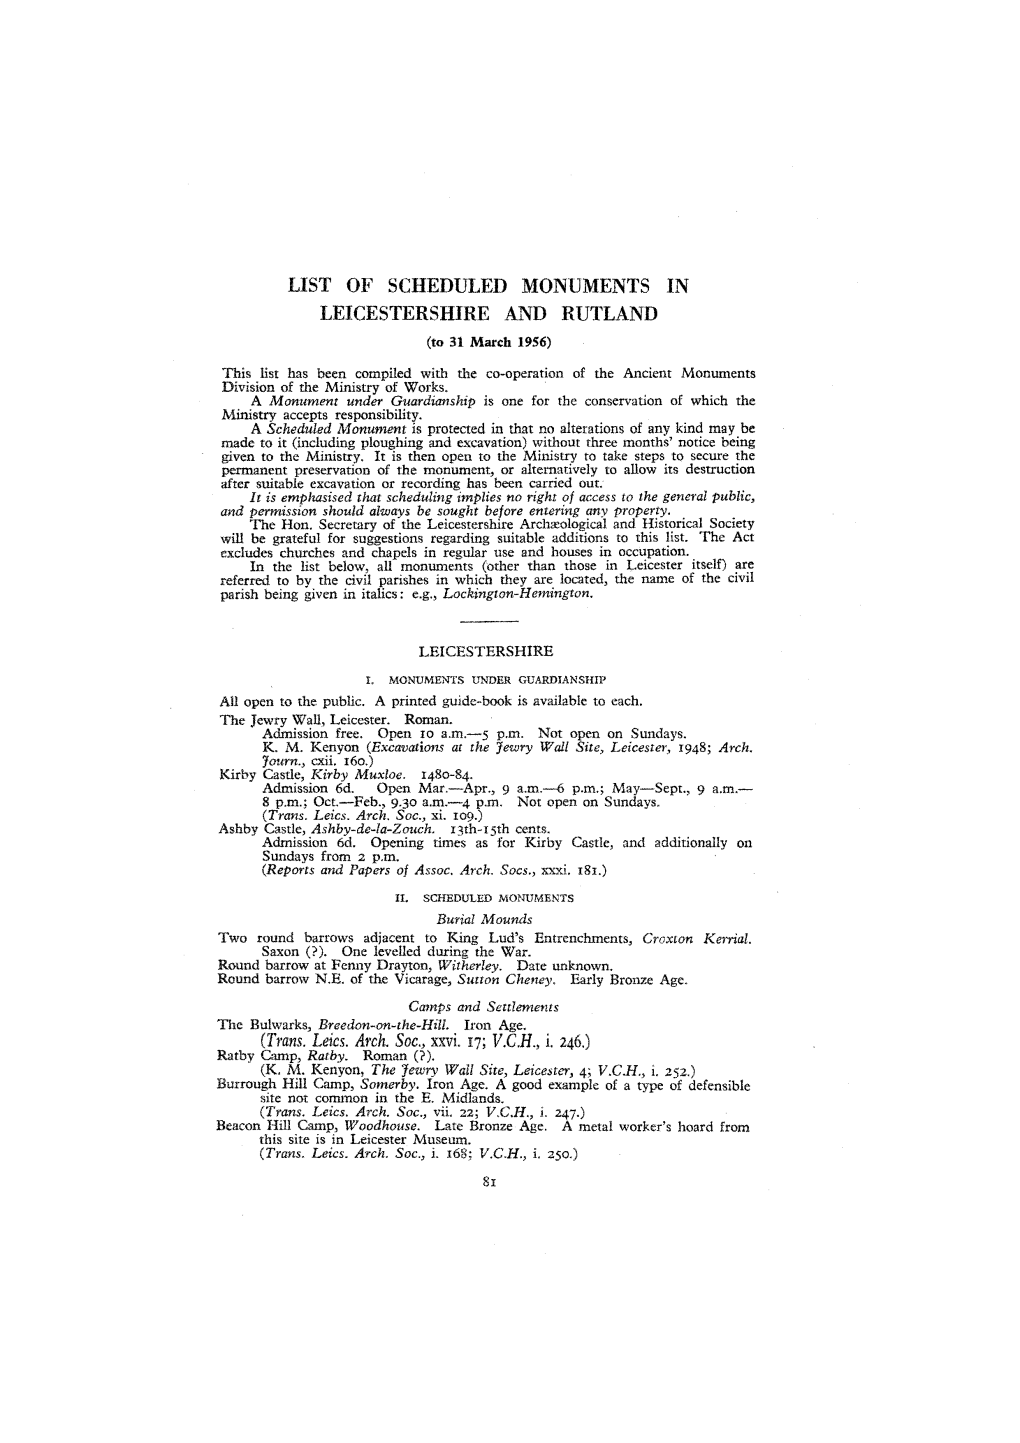 LIST of SCHEDULED MONUMENTS in LEICESTERSHIRE and RUTLAND (To 31 March 1956)